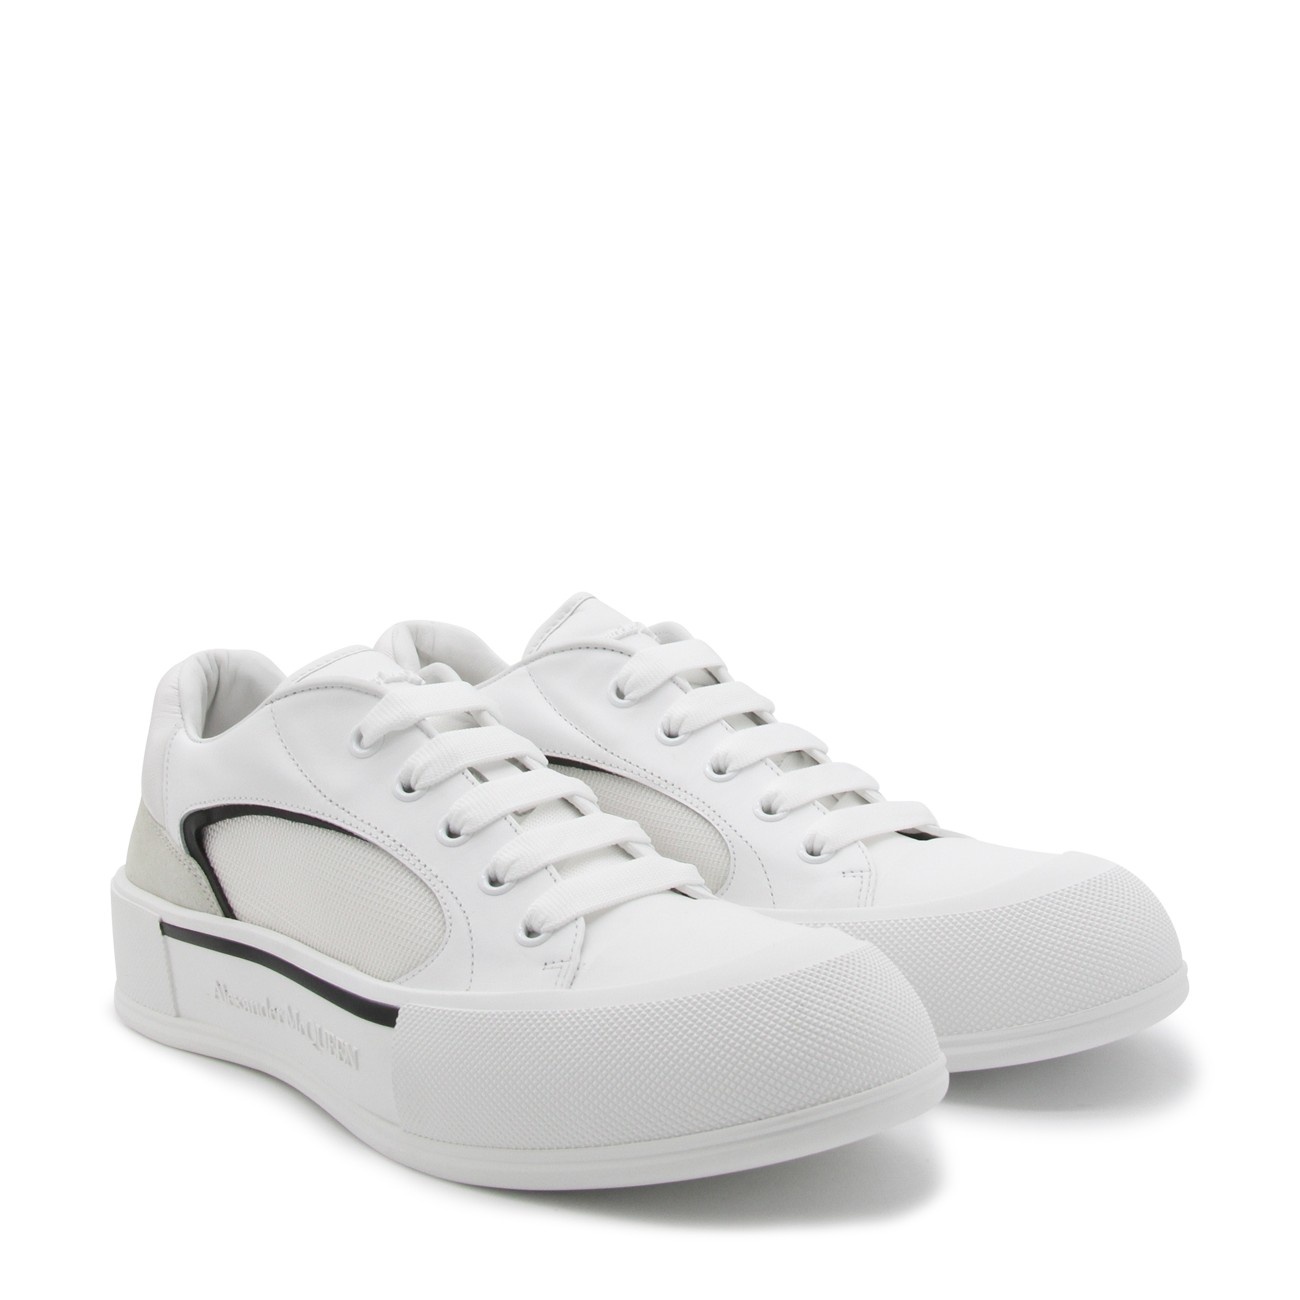 white leather plimsoll sneakers - 2